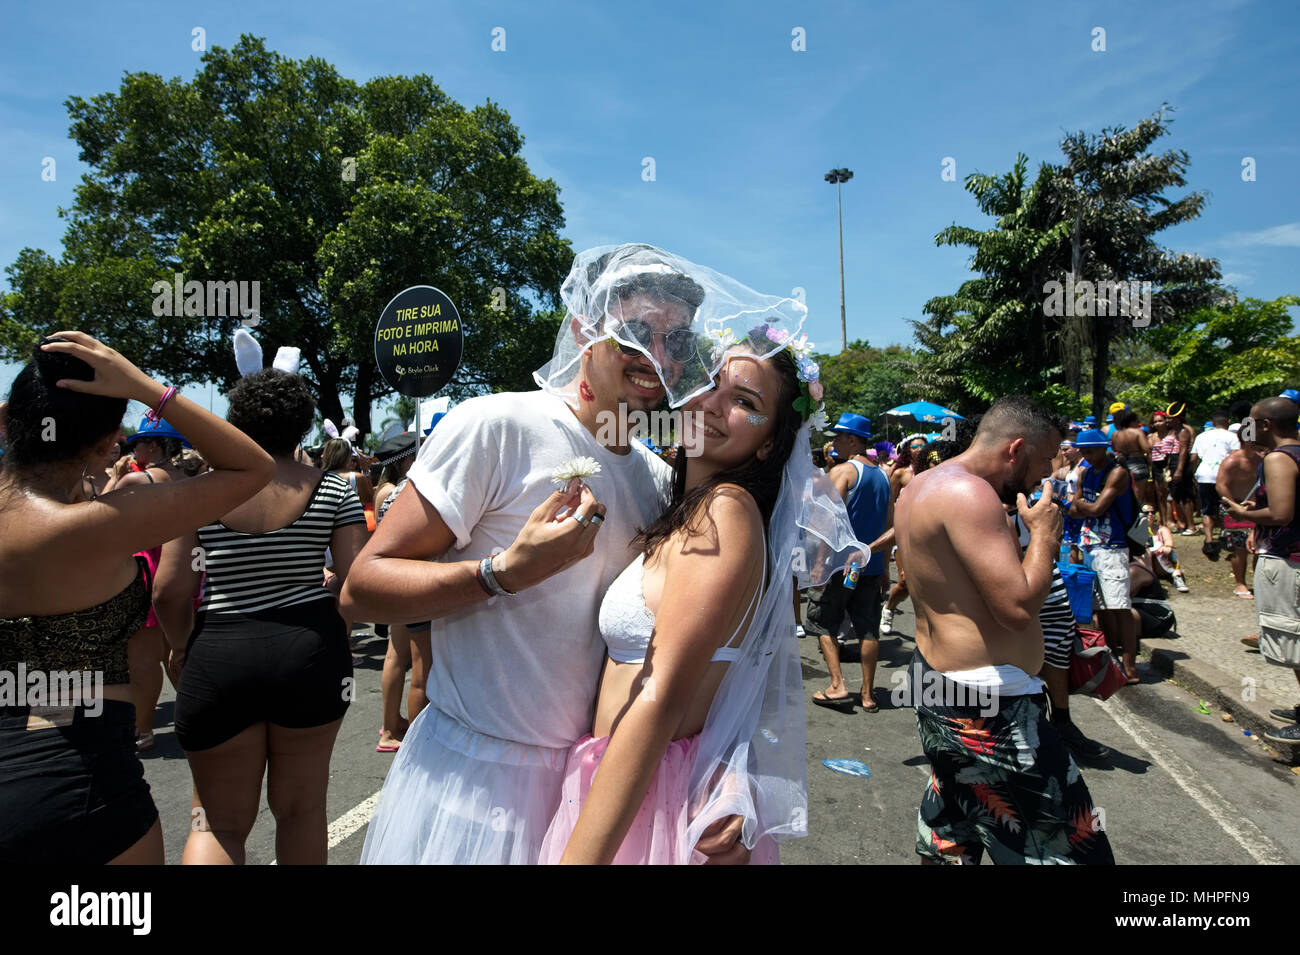 Rio de Janeiro, Brazil - February 11, 2018: Young Brazilian revelers smile for the camera at a carnival street party Stock Photo